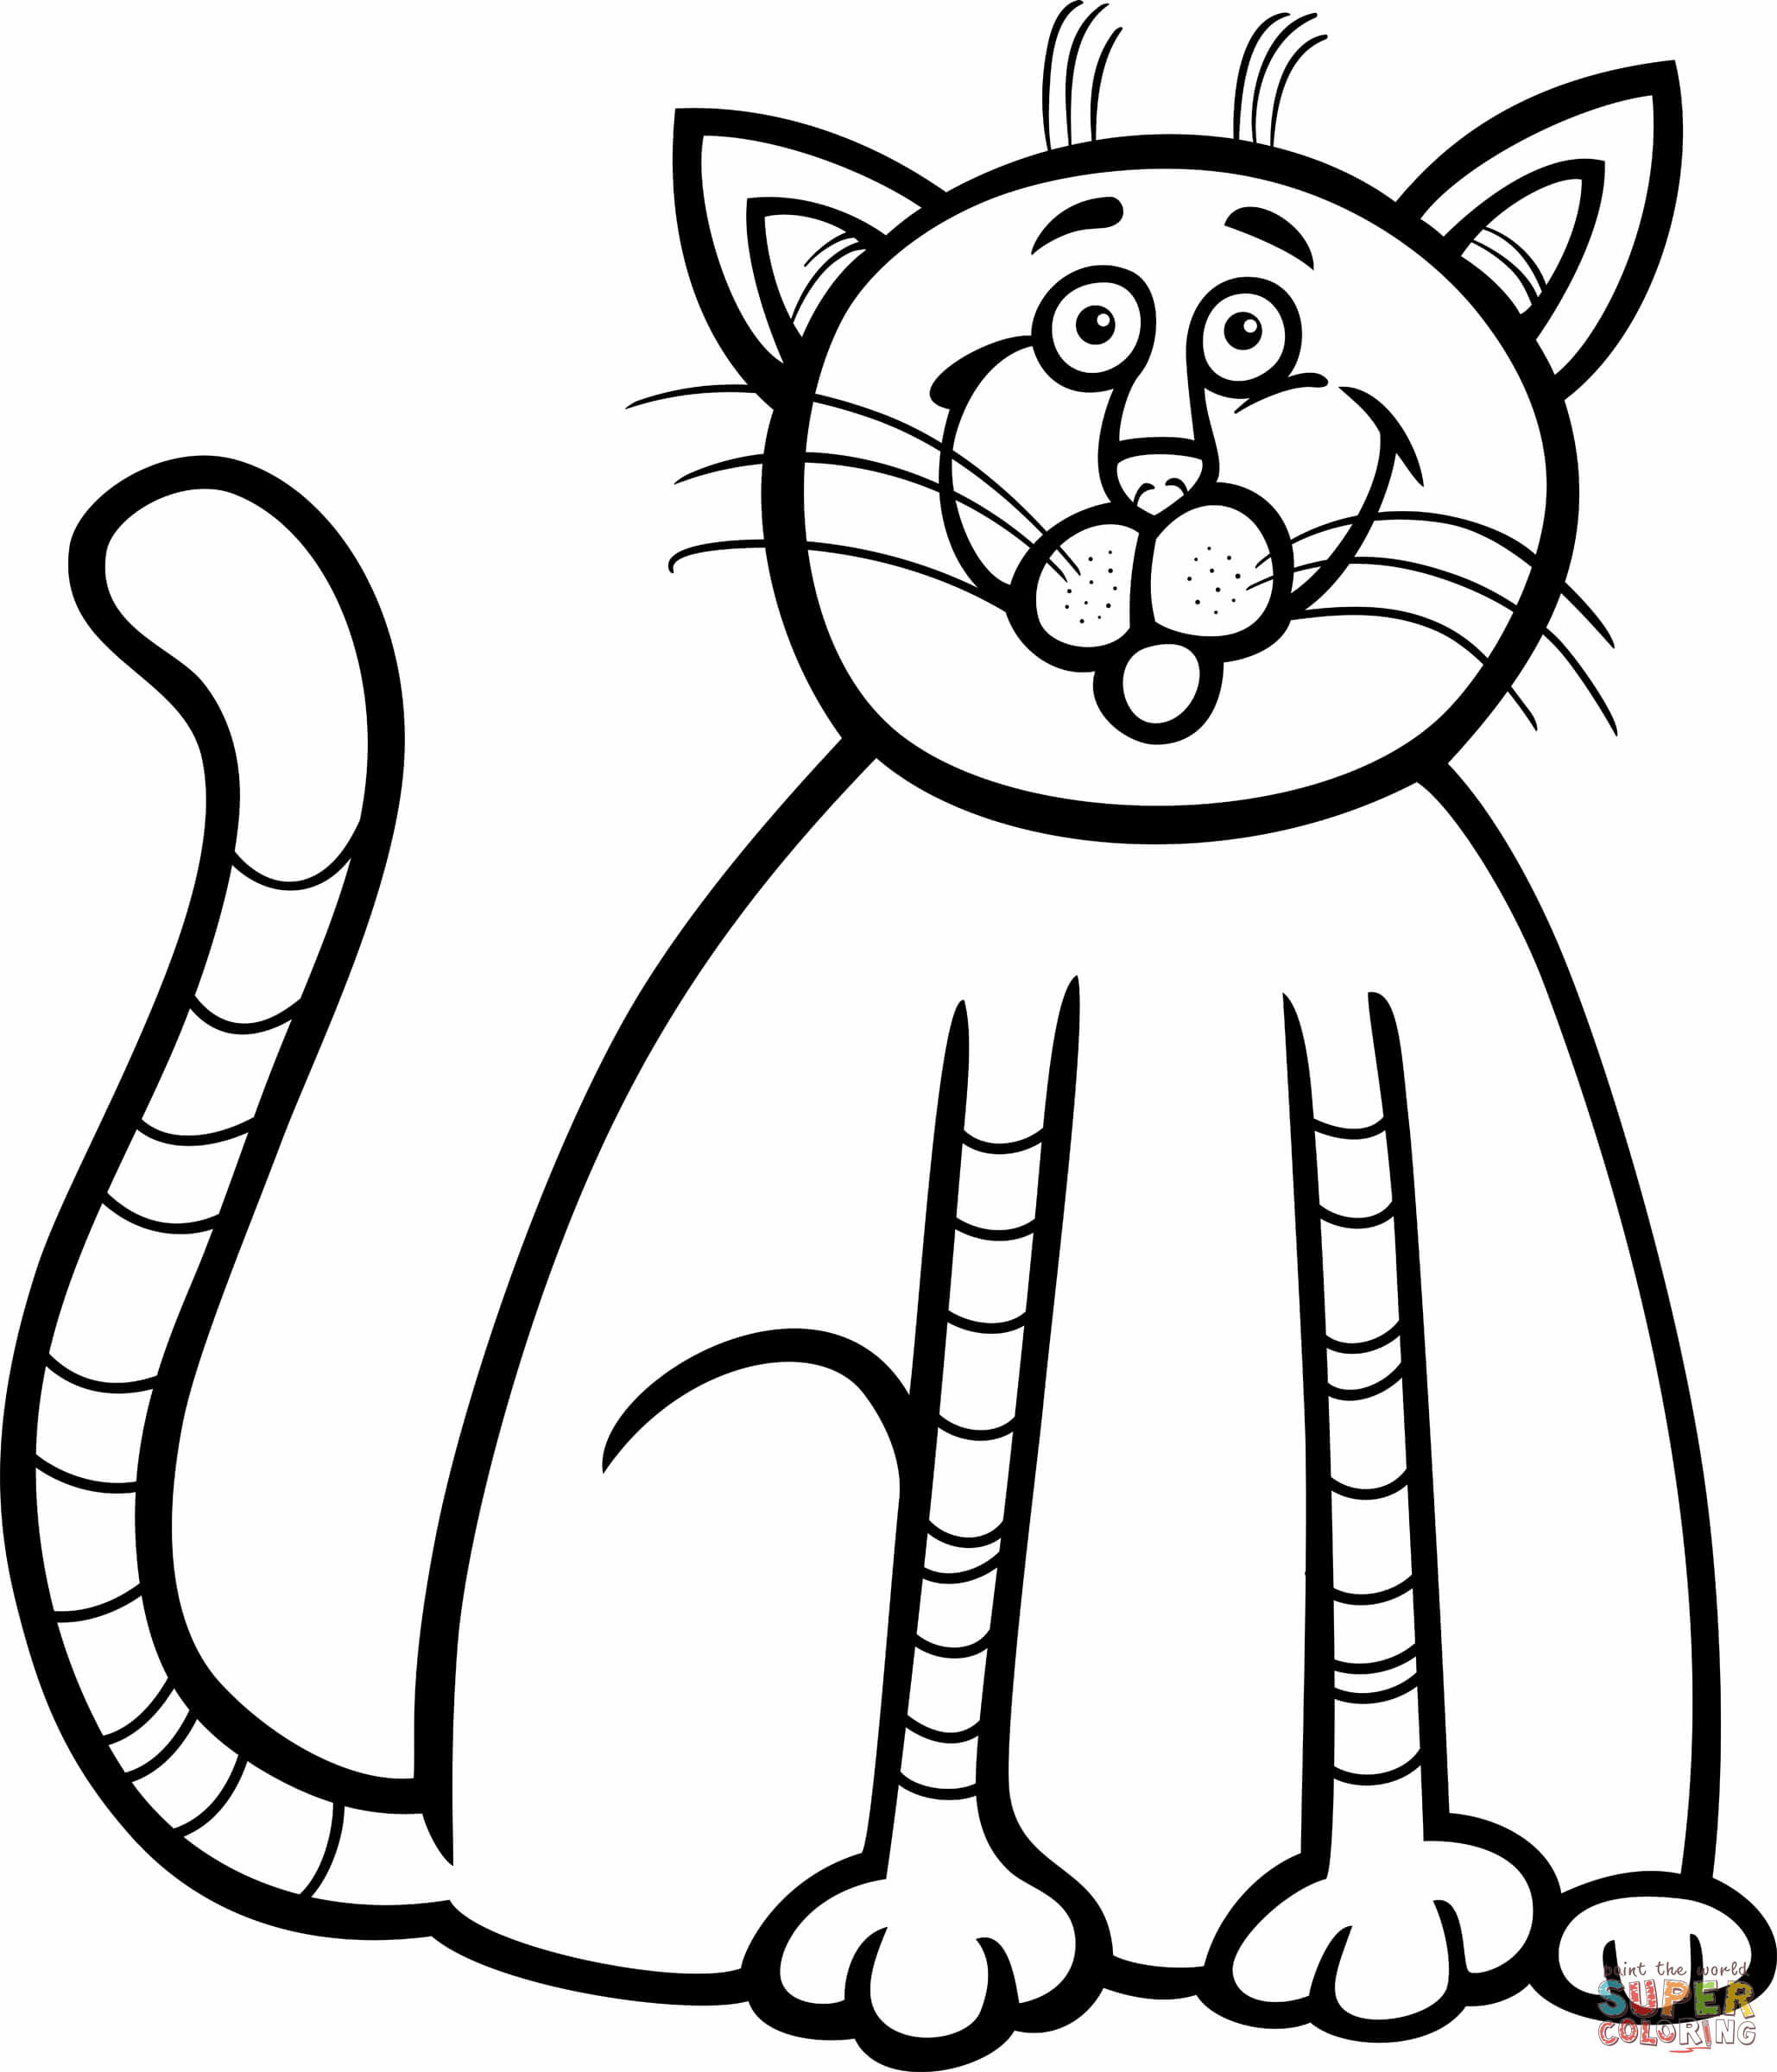 2058x2400 Images Kitten Coloring Page 47 For To Download with Kitten Coloring Page